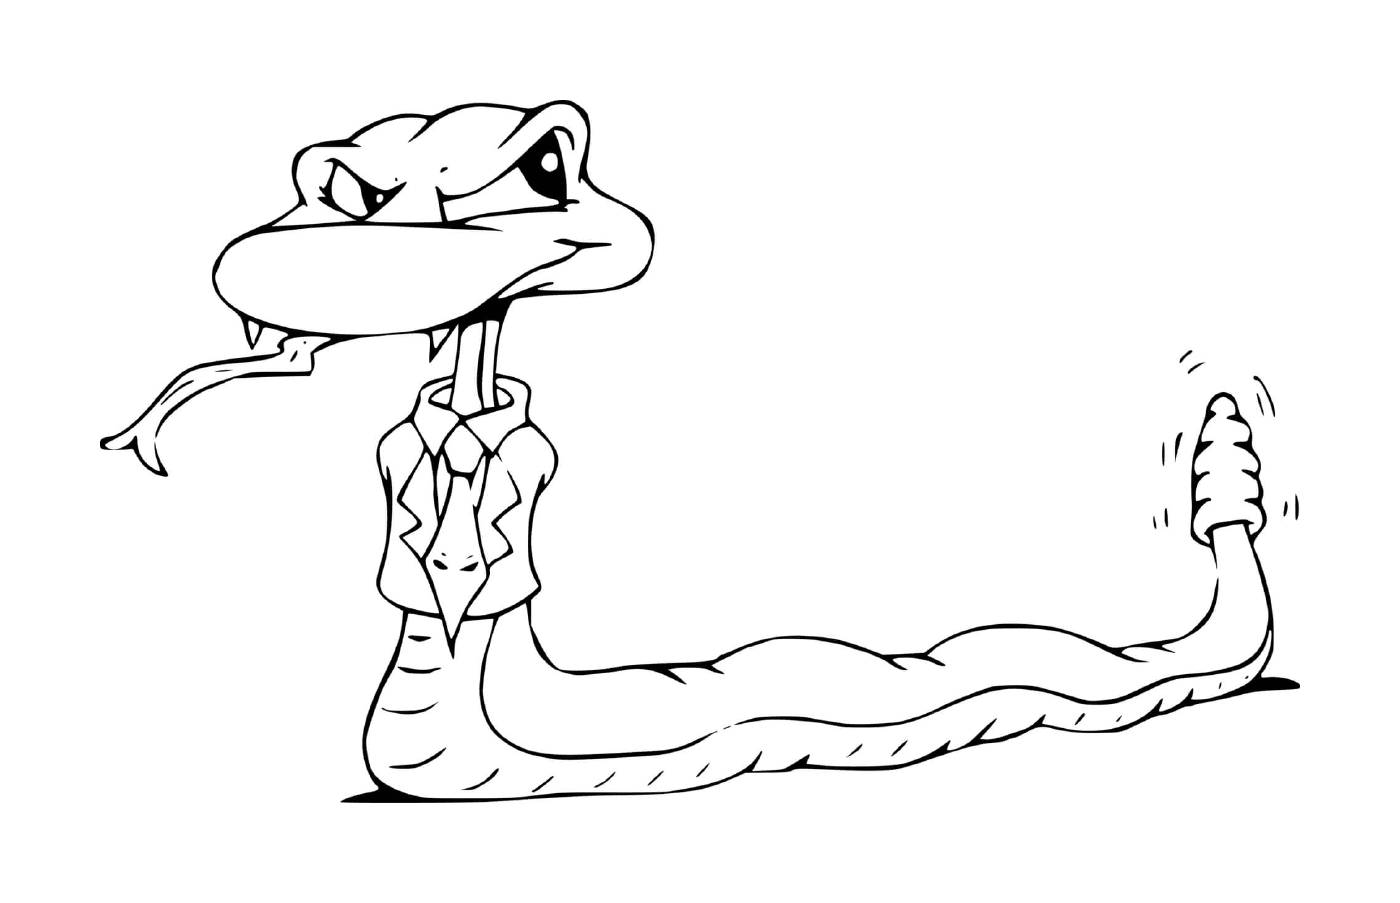  Snake with tie 